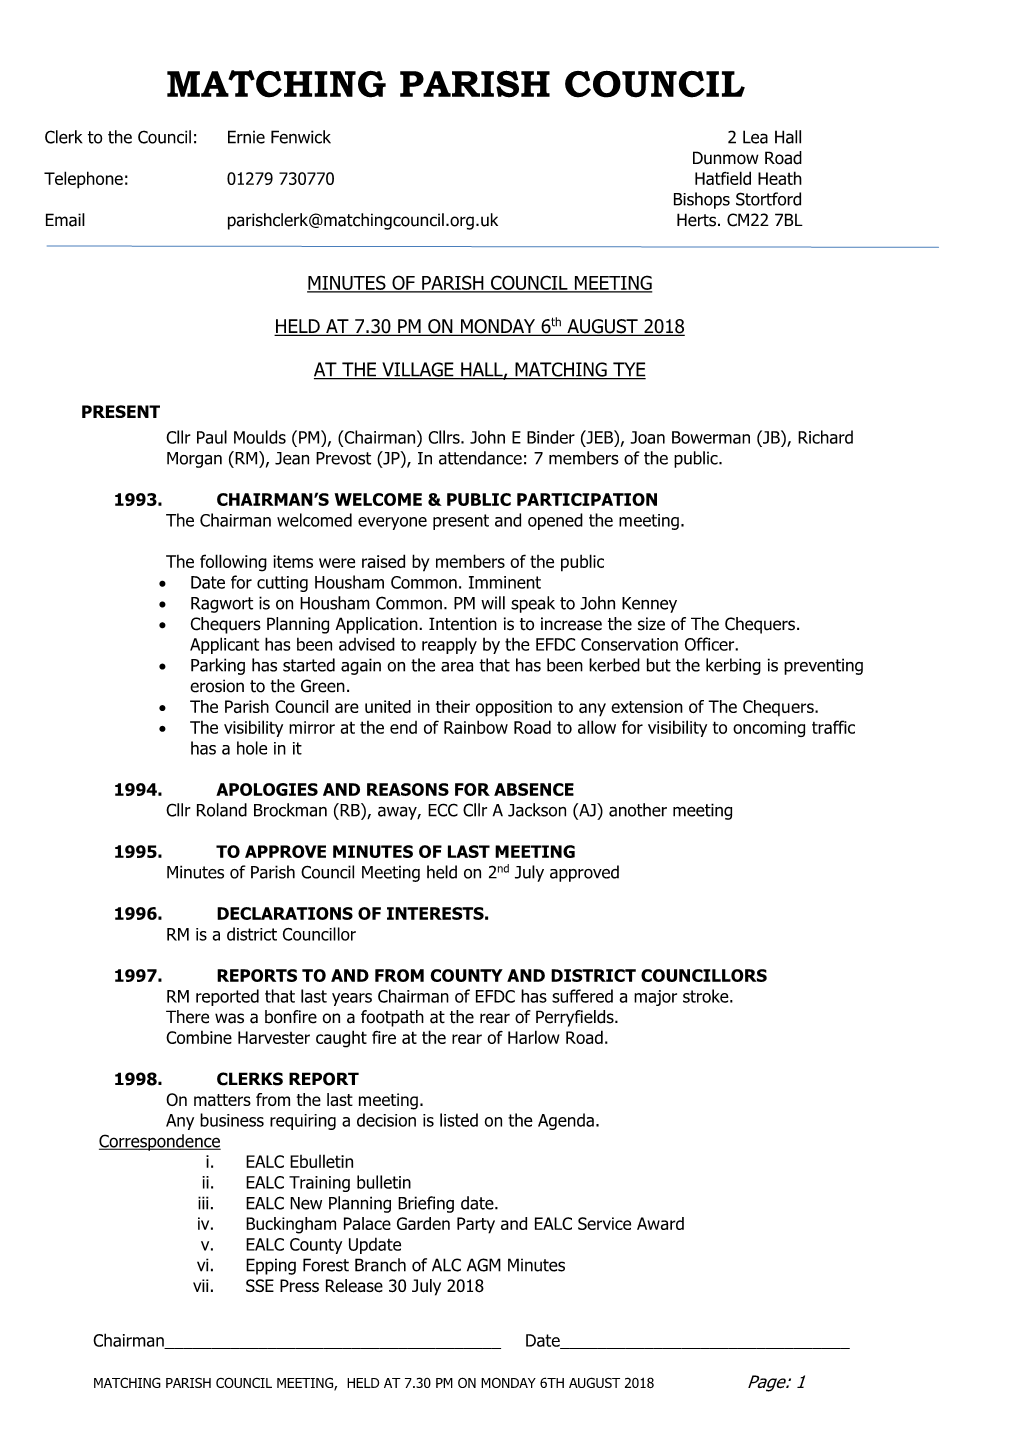 Minutes of Annual Parish Council Meeting